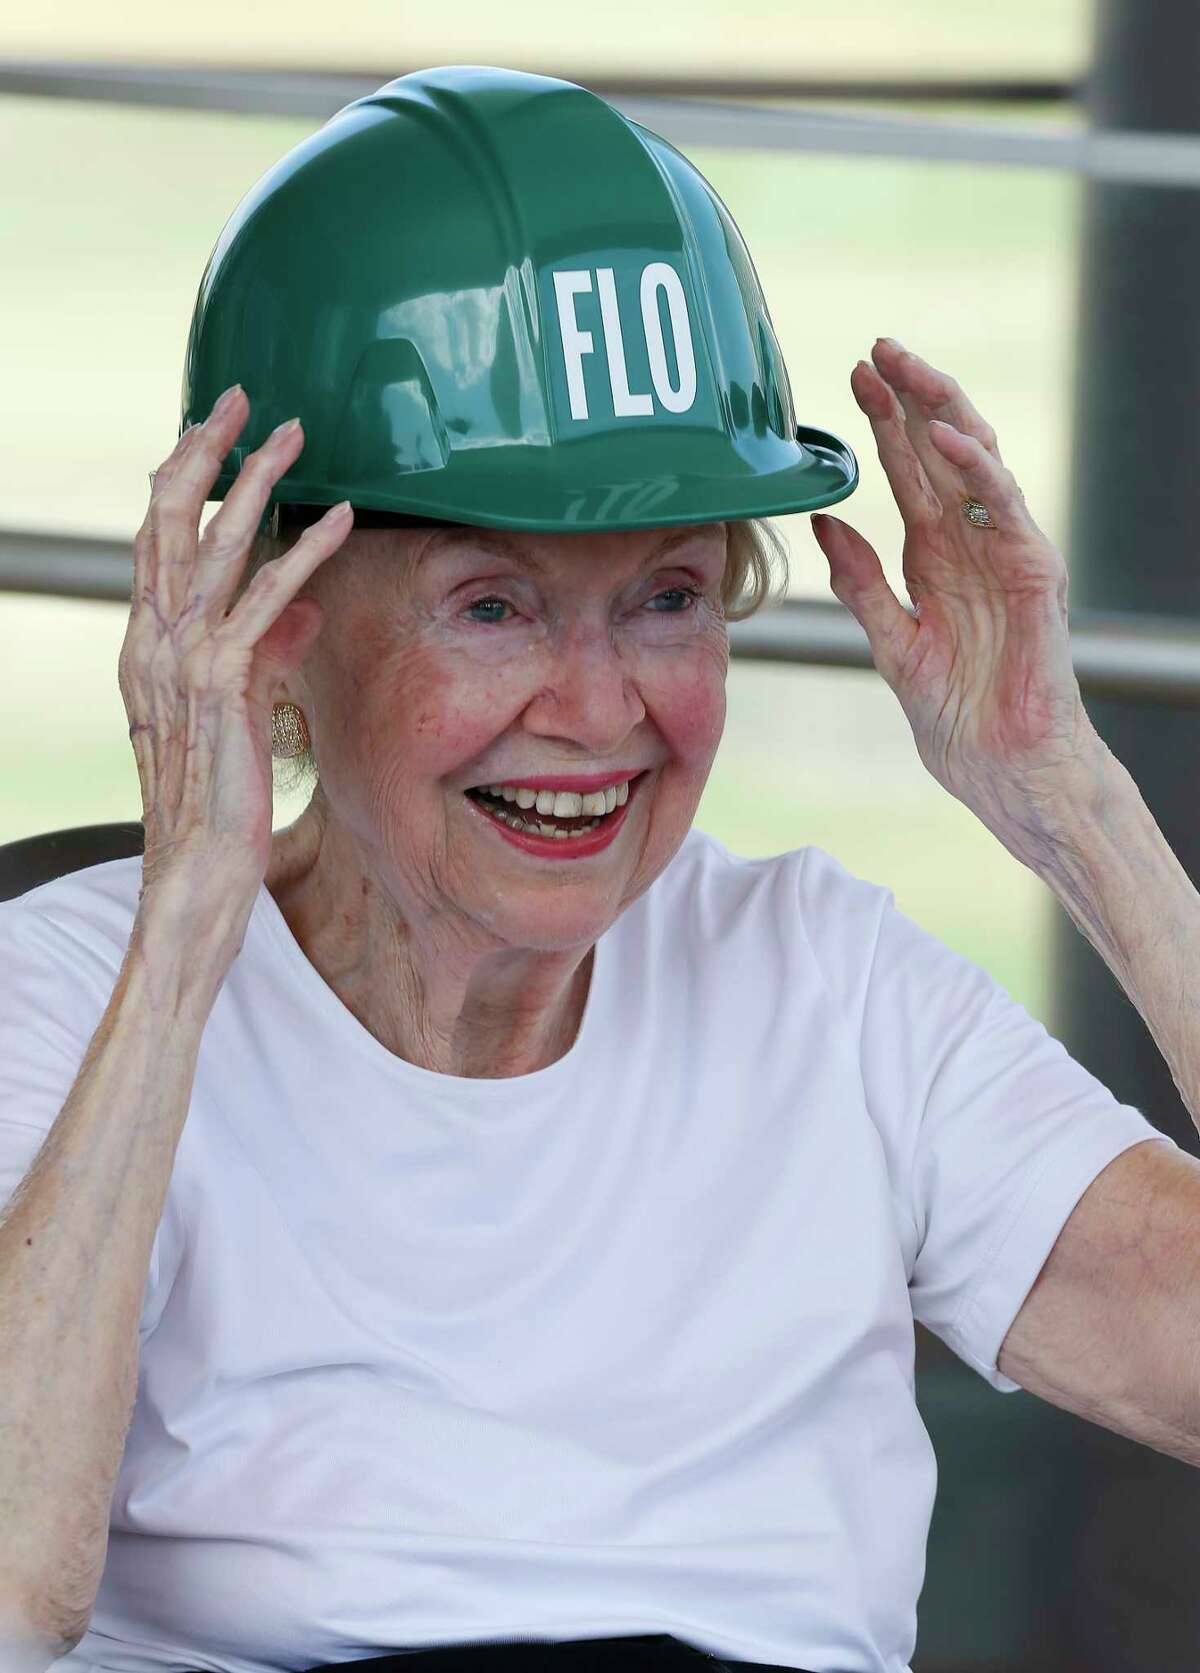 Flor Crichton puts on a hard hat as she is honored during a gathering of donors watching the moving of a 70-year-old live oak tree at Hemisfair Park, Thursday, May 31, 2018. Crichton funded the Juan O?•Gorman mural for the 1968 fair and also donated to save trees at the park for the development that is scheduled to open in 2021. For her philanthropic work in the 20th and 21st century, she will be honored with a grove of trees named, ?’The Flora Cameron Crichton Mural Grove,?“ providing the public a shaded view of the mural from civic park. Through donations totaling $550,000, 18 trees will be saved. In total, the park will have 246 shade-producing trees when it opens.